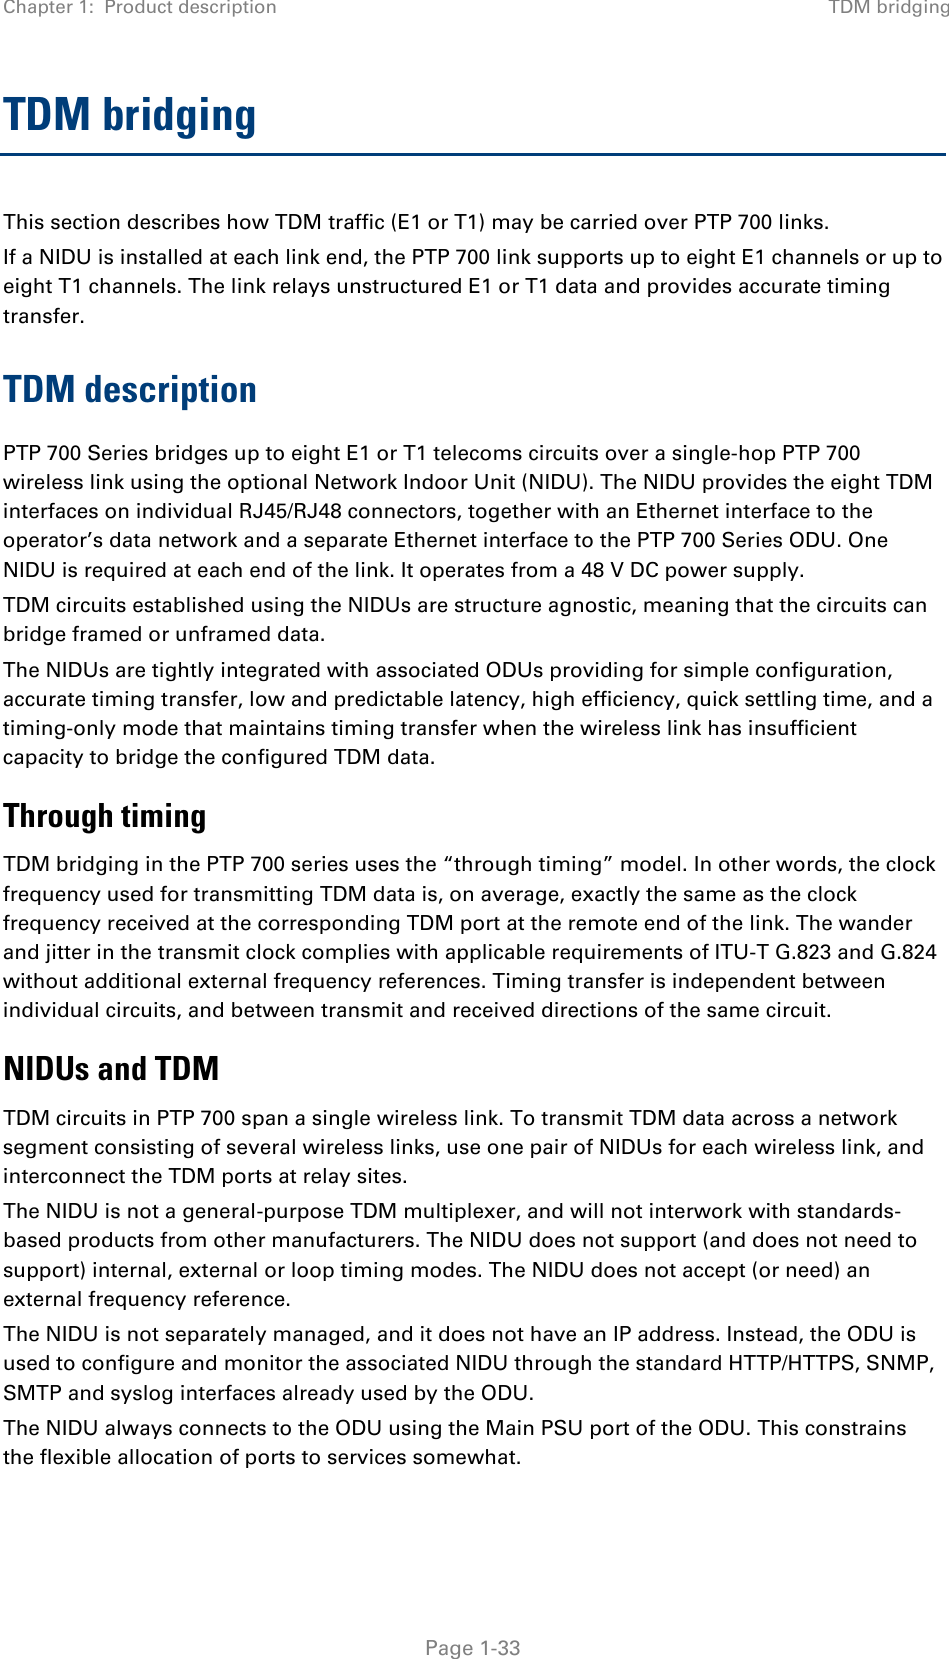 Chapter 1:  Product description TDM bridging  TDM bridging This section describes how TDM traffic (E1 or T1) may be carried over PTP 700 links. If a NIDU is installed at each link end, the PTP 700 link supports up to eight E1 channels or up to eight T1 channels. The link relays unstructured E1 or T1 data and provides accurate timing transfer. TDM description PTP 700 Series bridges up to eight E1 or T1 telecoms circuits over a single-hop PTP 700 wireless link using the optional Network Indoor Unit (NIDU). The NIDU provides the eight TDM interfaces on individual RJ45/RJ48 connectors, together with an Ethernet interface to the operator’s data network and a separate Ethernet interface to the PTP 700 Series ODU. One NIDU is required at each end of the link. It operates from a 48 V DC power supply. TDM circuits established using the NIDUs are structure agnostic, meaning that the circuits can bridge framed or unframed data. The NIDUs are tightly integrated with associated ODUs providing for simple configuration, accurate timing transfer, low and predictable latency, high efficiency, quick settling time, and a timing-only mode that maintains timing transfer when the wireless link has insufficient capacity to bridge the configured TDM data. Through timing TDM bridging in the PTP 700 series uses the “through timing” model. In other words, the clock frequency used for transmitting TDM data is, on average, exactly the same as the clock frequency received at the corresponding TDM port at the remote end of the link. The wander and jitter in the transmit clock complies with applicable requirements of ITU-T G.823 and G.824 without additional external frequency references. Timing transfer is independent between individual circuits, and between transmit and received directions of the same circuit. NIDUs and TDM TDM circuits in PTP 700 span a single wireless link. To transmit TDM data across a network segment consisting of several wireless links, use one pair of NIDUs for each wireless link, and interconnect the TDM ports at relay sites. The NIDU is not a general-purpose TDM multiplexer, and will not interwork with standards-based products from other manufacturers. The NIDU does not support (and does not need to support) internal, external or loop timing modes. The NIDU does not accept (or need) an external frequency reference. The NIDU is not separately managed, and it does not have an IP address. Instead, the ODU is used to configure and monitor the associated NIDU through the standard HTTP/HTTPS, SNMP, SMTP and syslog interfaces already used by the ODU. The NIDU always connects to the ODU using the Main PSU port of the ODU. This constrains the flexible allocation of ports to services somewhat.  Page 1-33 